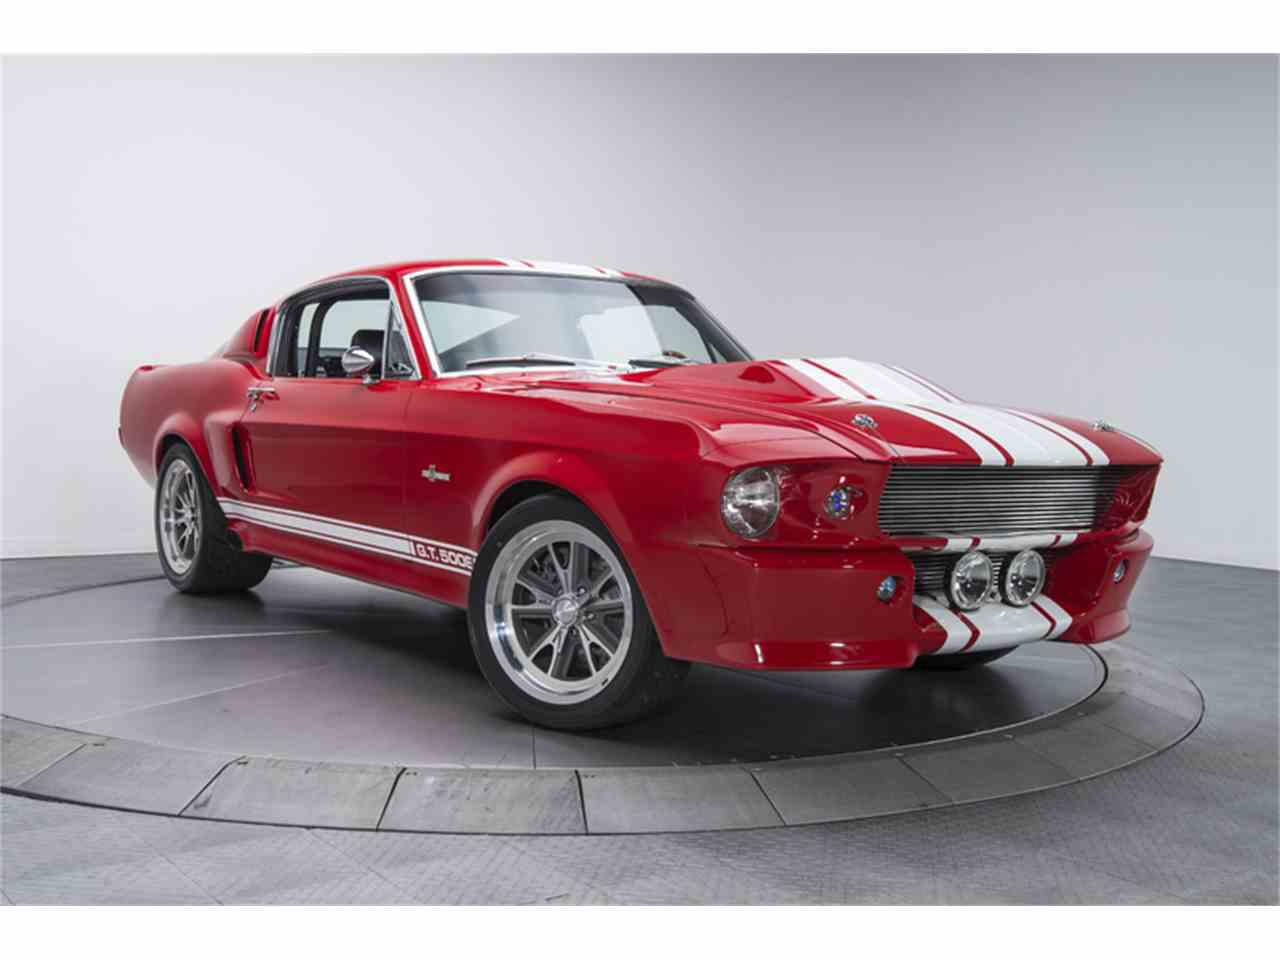 1967 Ford Mustang GT500E Super Snake for Sale | ClassicCars.com | CC-939809